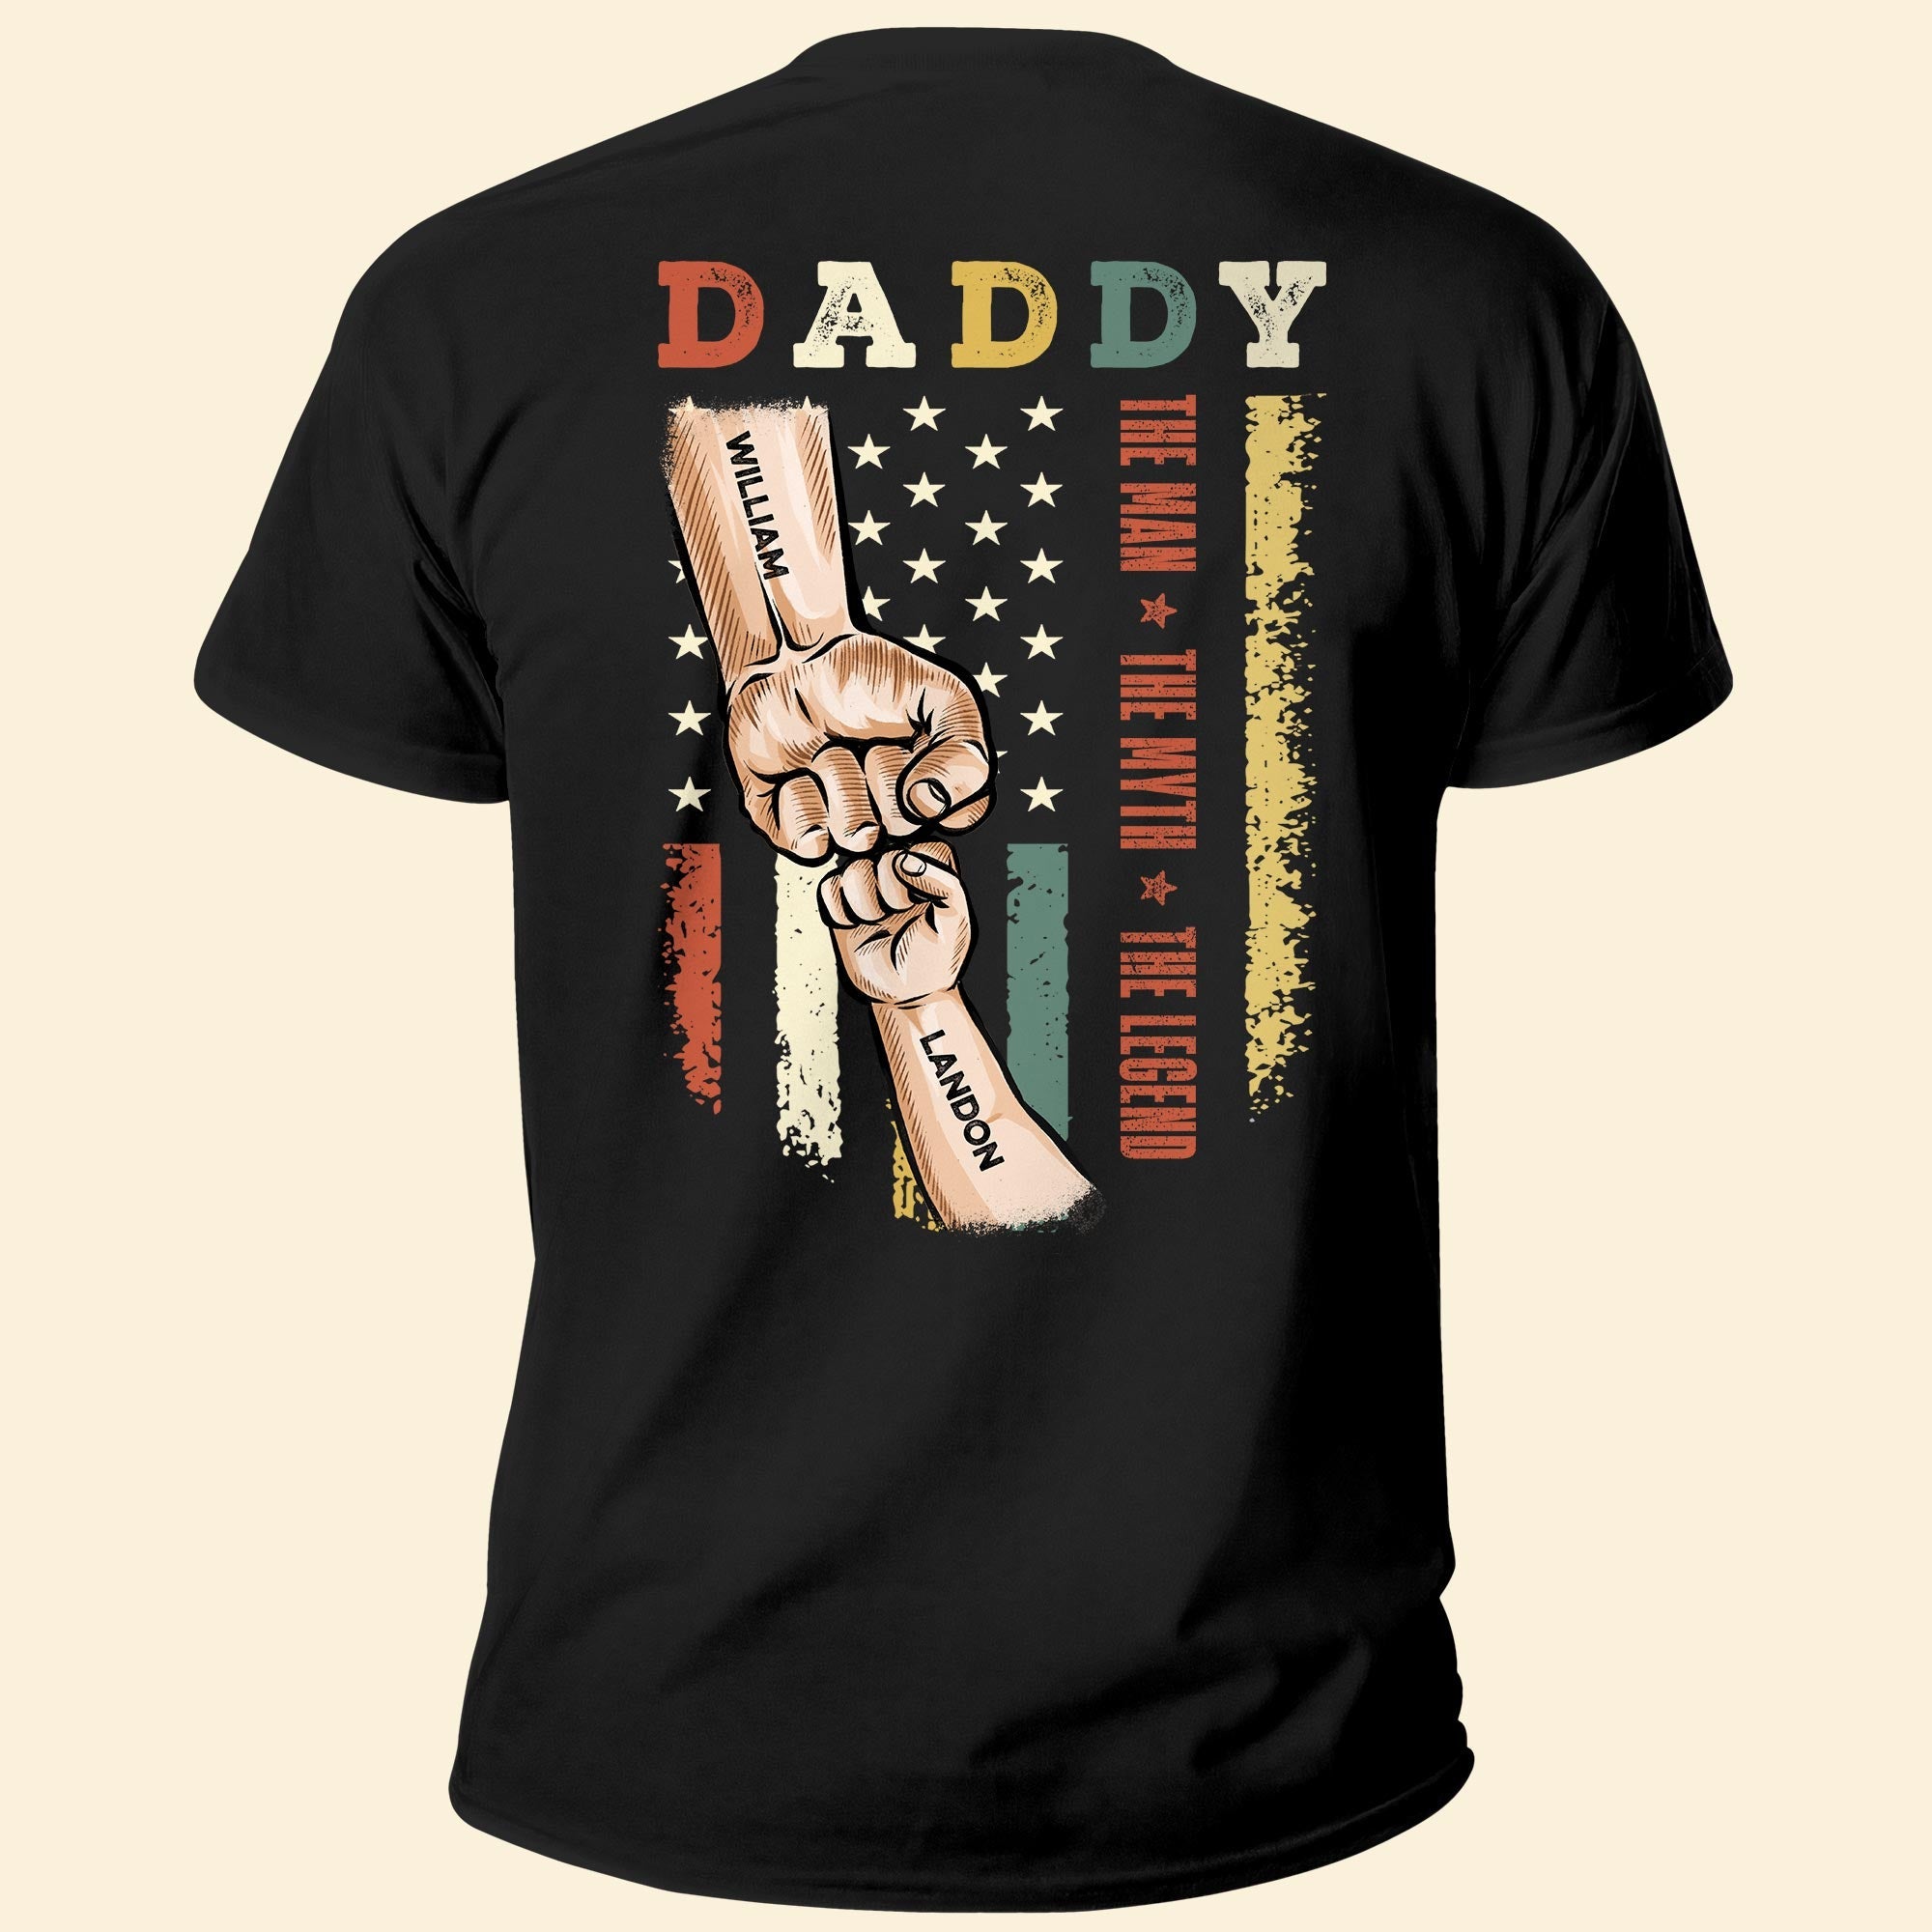 Personalized Back Printed Shirt, Daddy The Man The Myth The Legend New Version